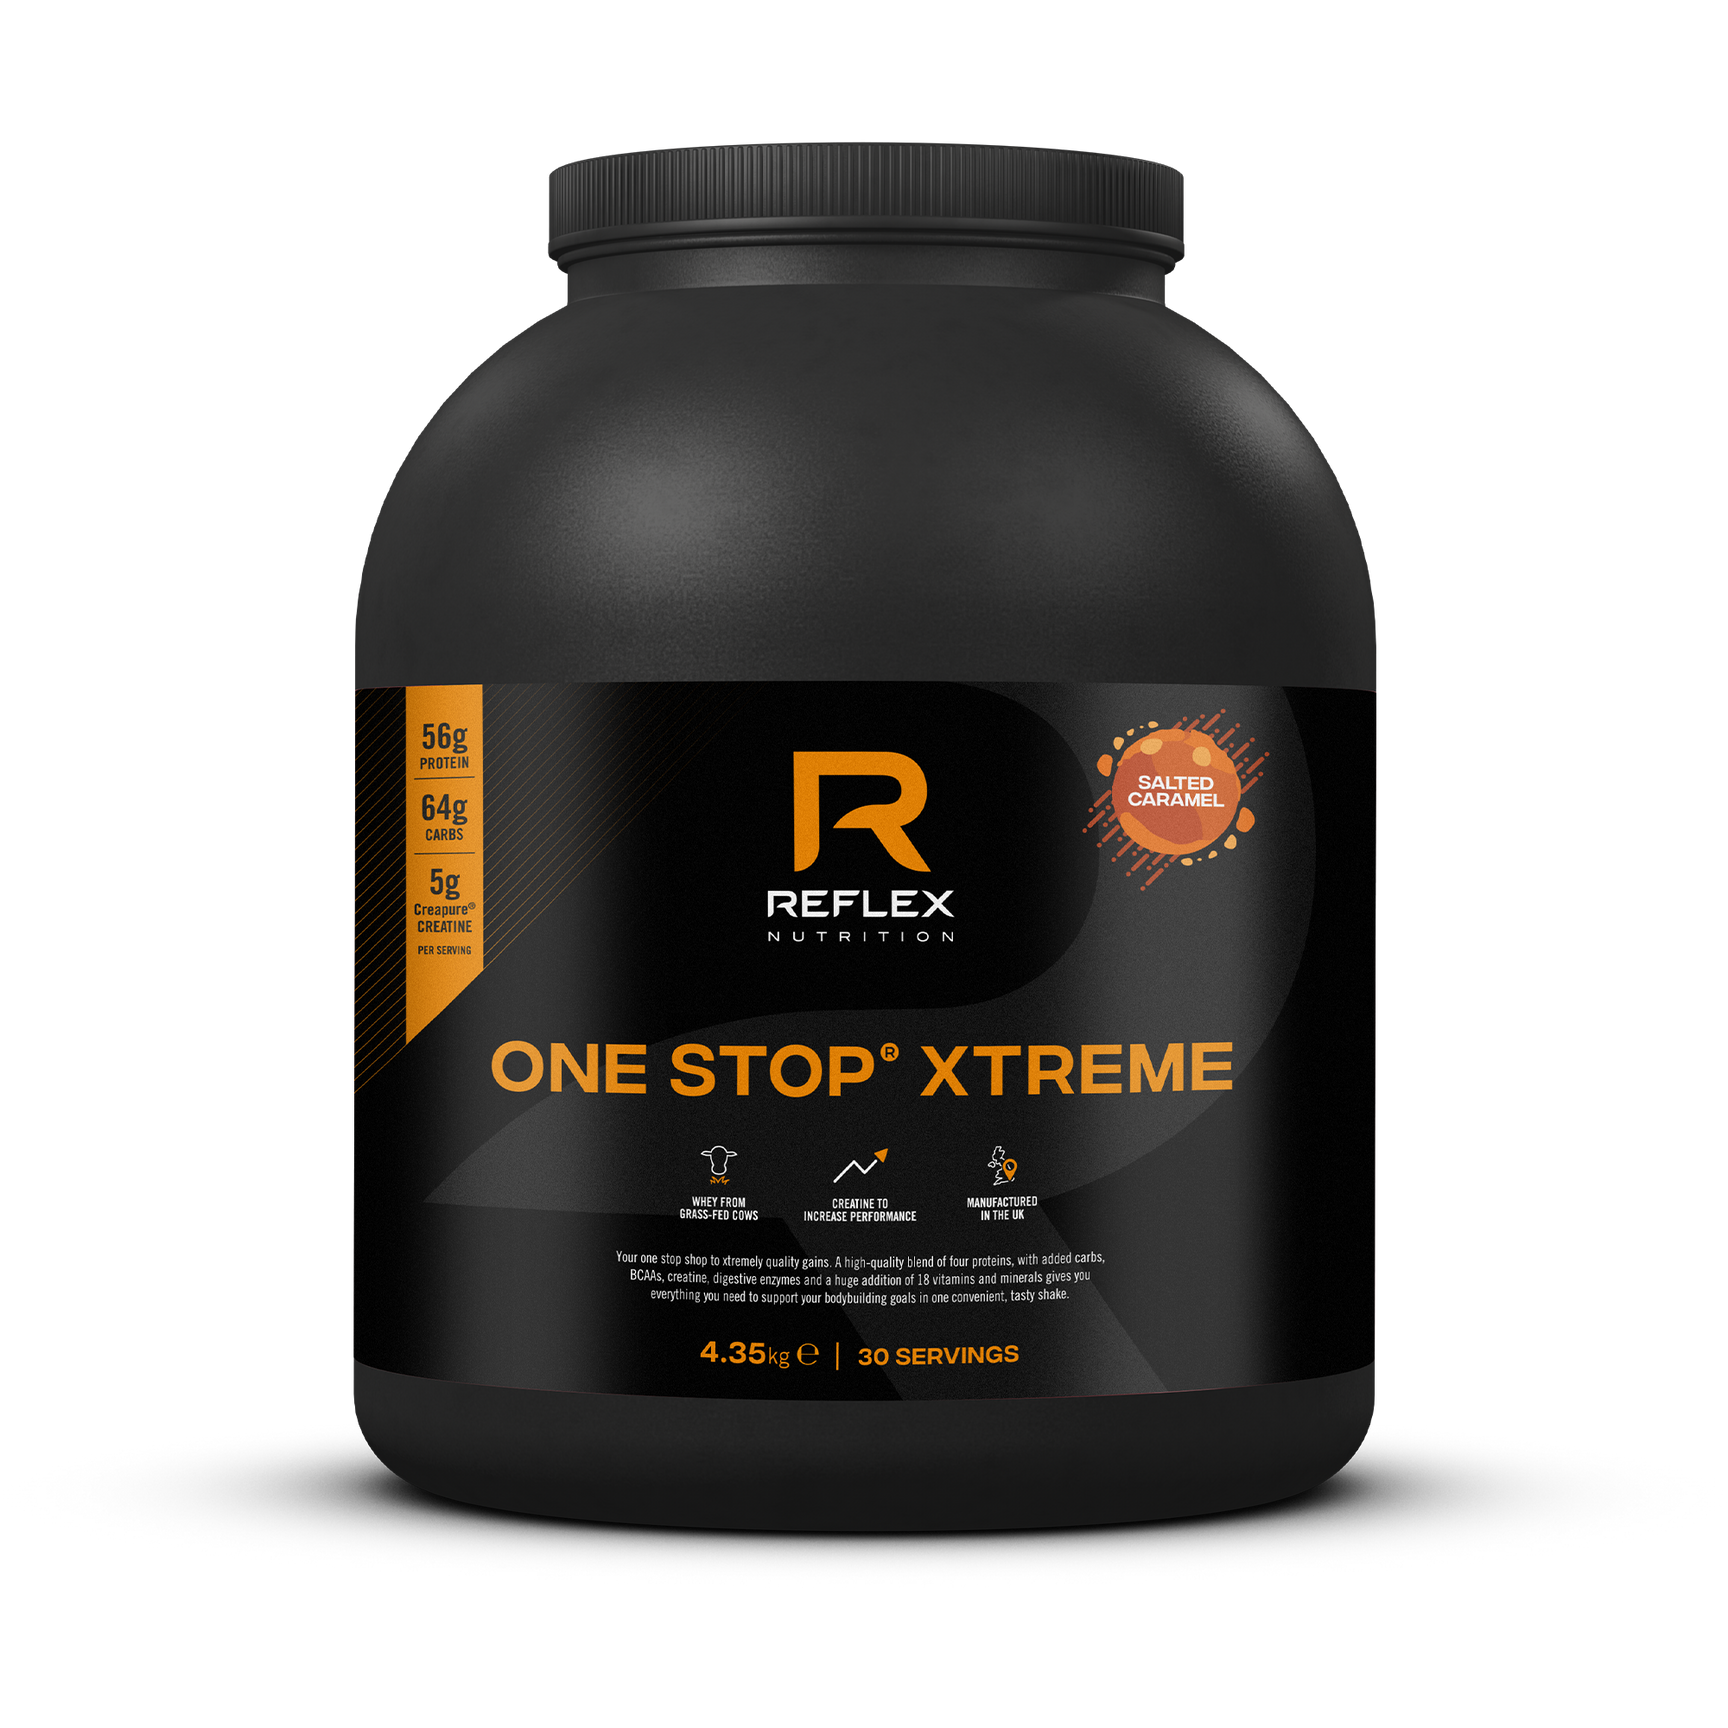 One Stop® Xtreme